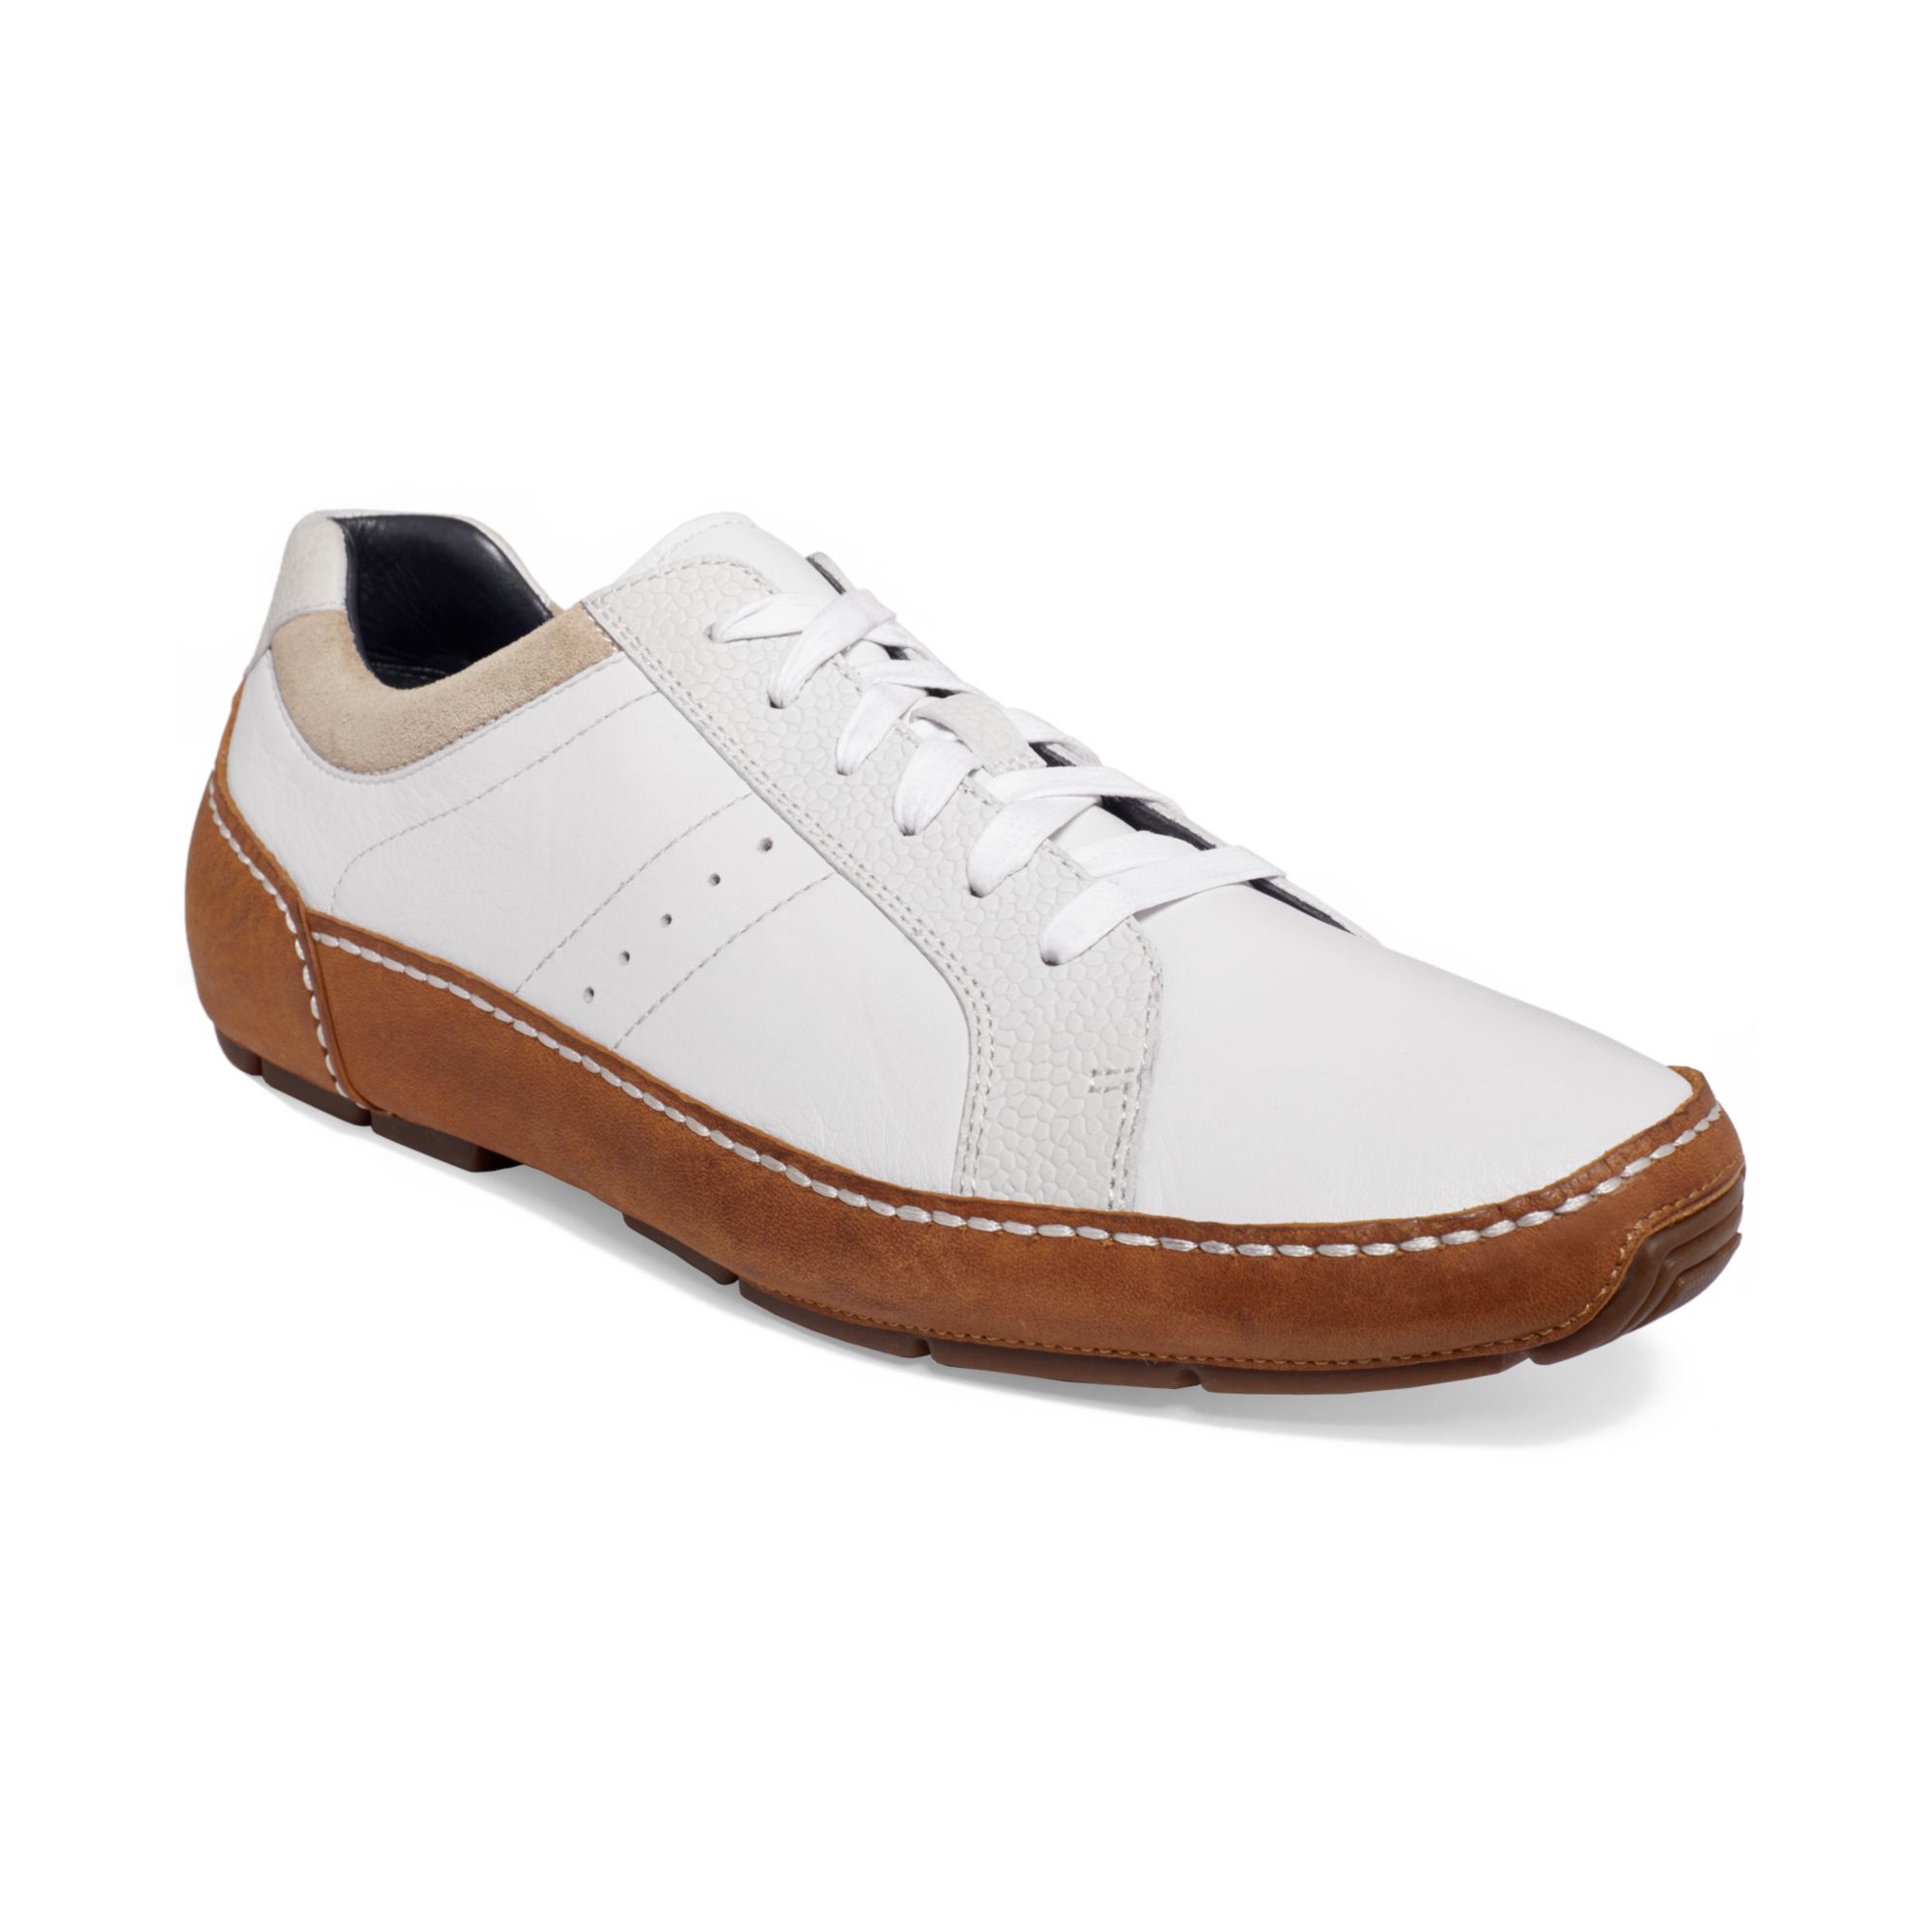 Cole Haan Air Mitchell Laceup Sneakers in White Oak (White) for Men - Lyst